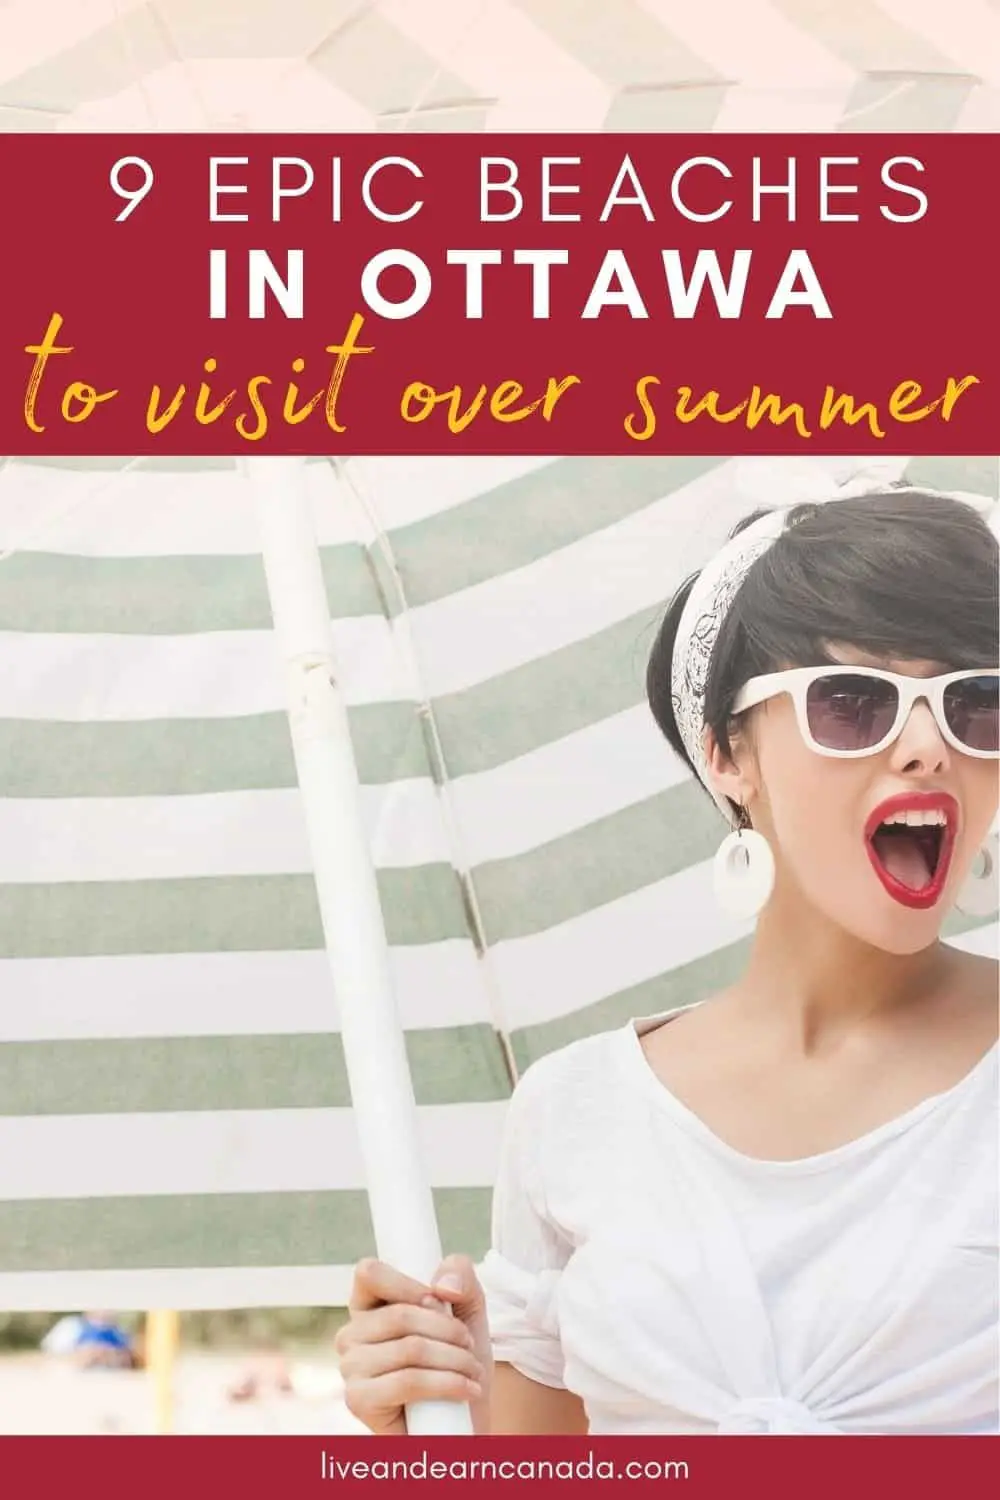 Whether you are looking for the best beaches in Ontario or the best beaches in Ottawa, we have you covered. Here is a list of 9 Beaches In And Around Ottawa You Need To Relax On This Summer! #ottawabeach #beachinottawa #beachlife